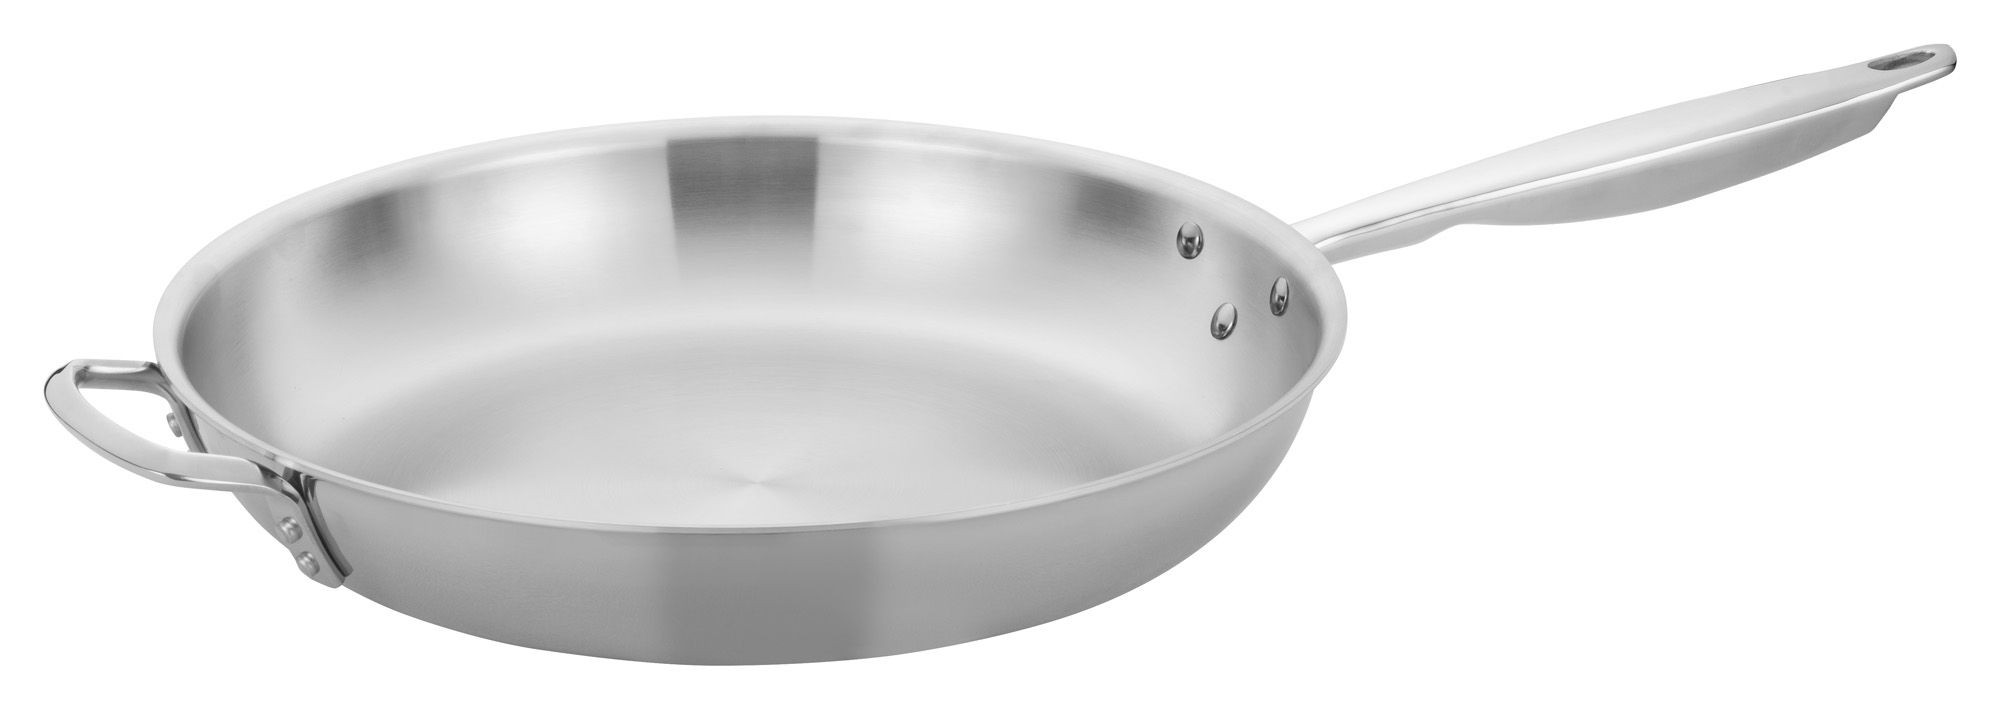 https://www.lionsdeal.com/itempics/Winco-TGFP-14-Tri-Ply-Stainless-Steel-Natural-Finish-Fry-Pan--14-quot--38440_xlarge.jpg